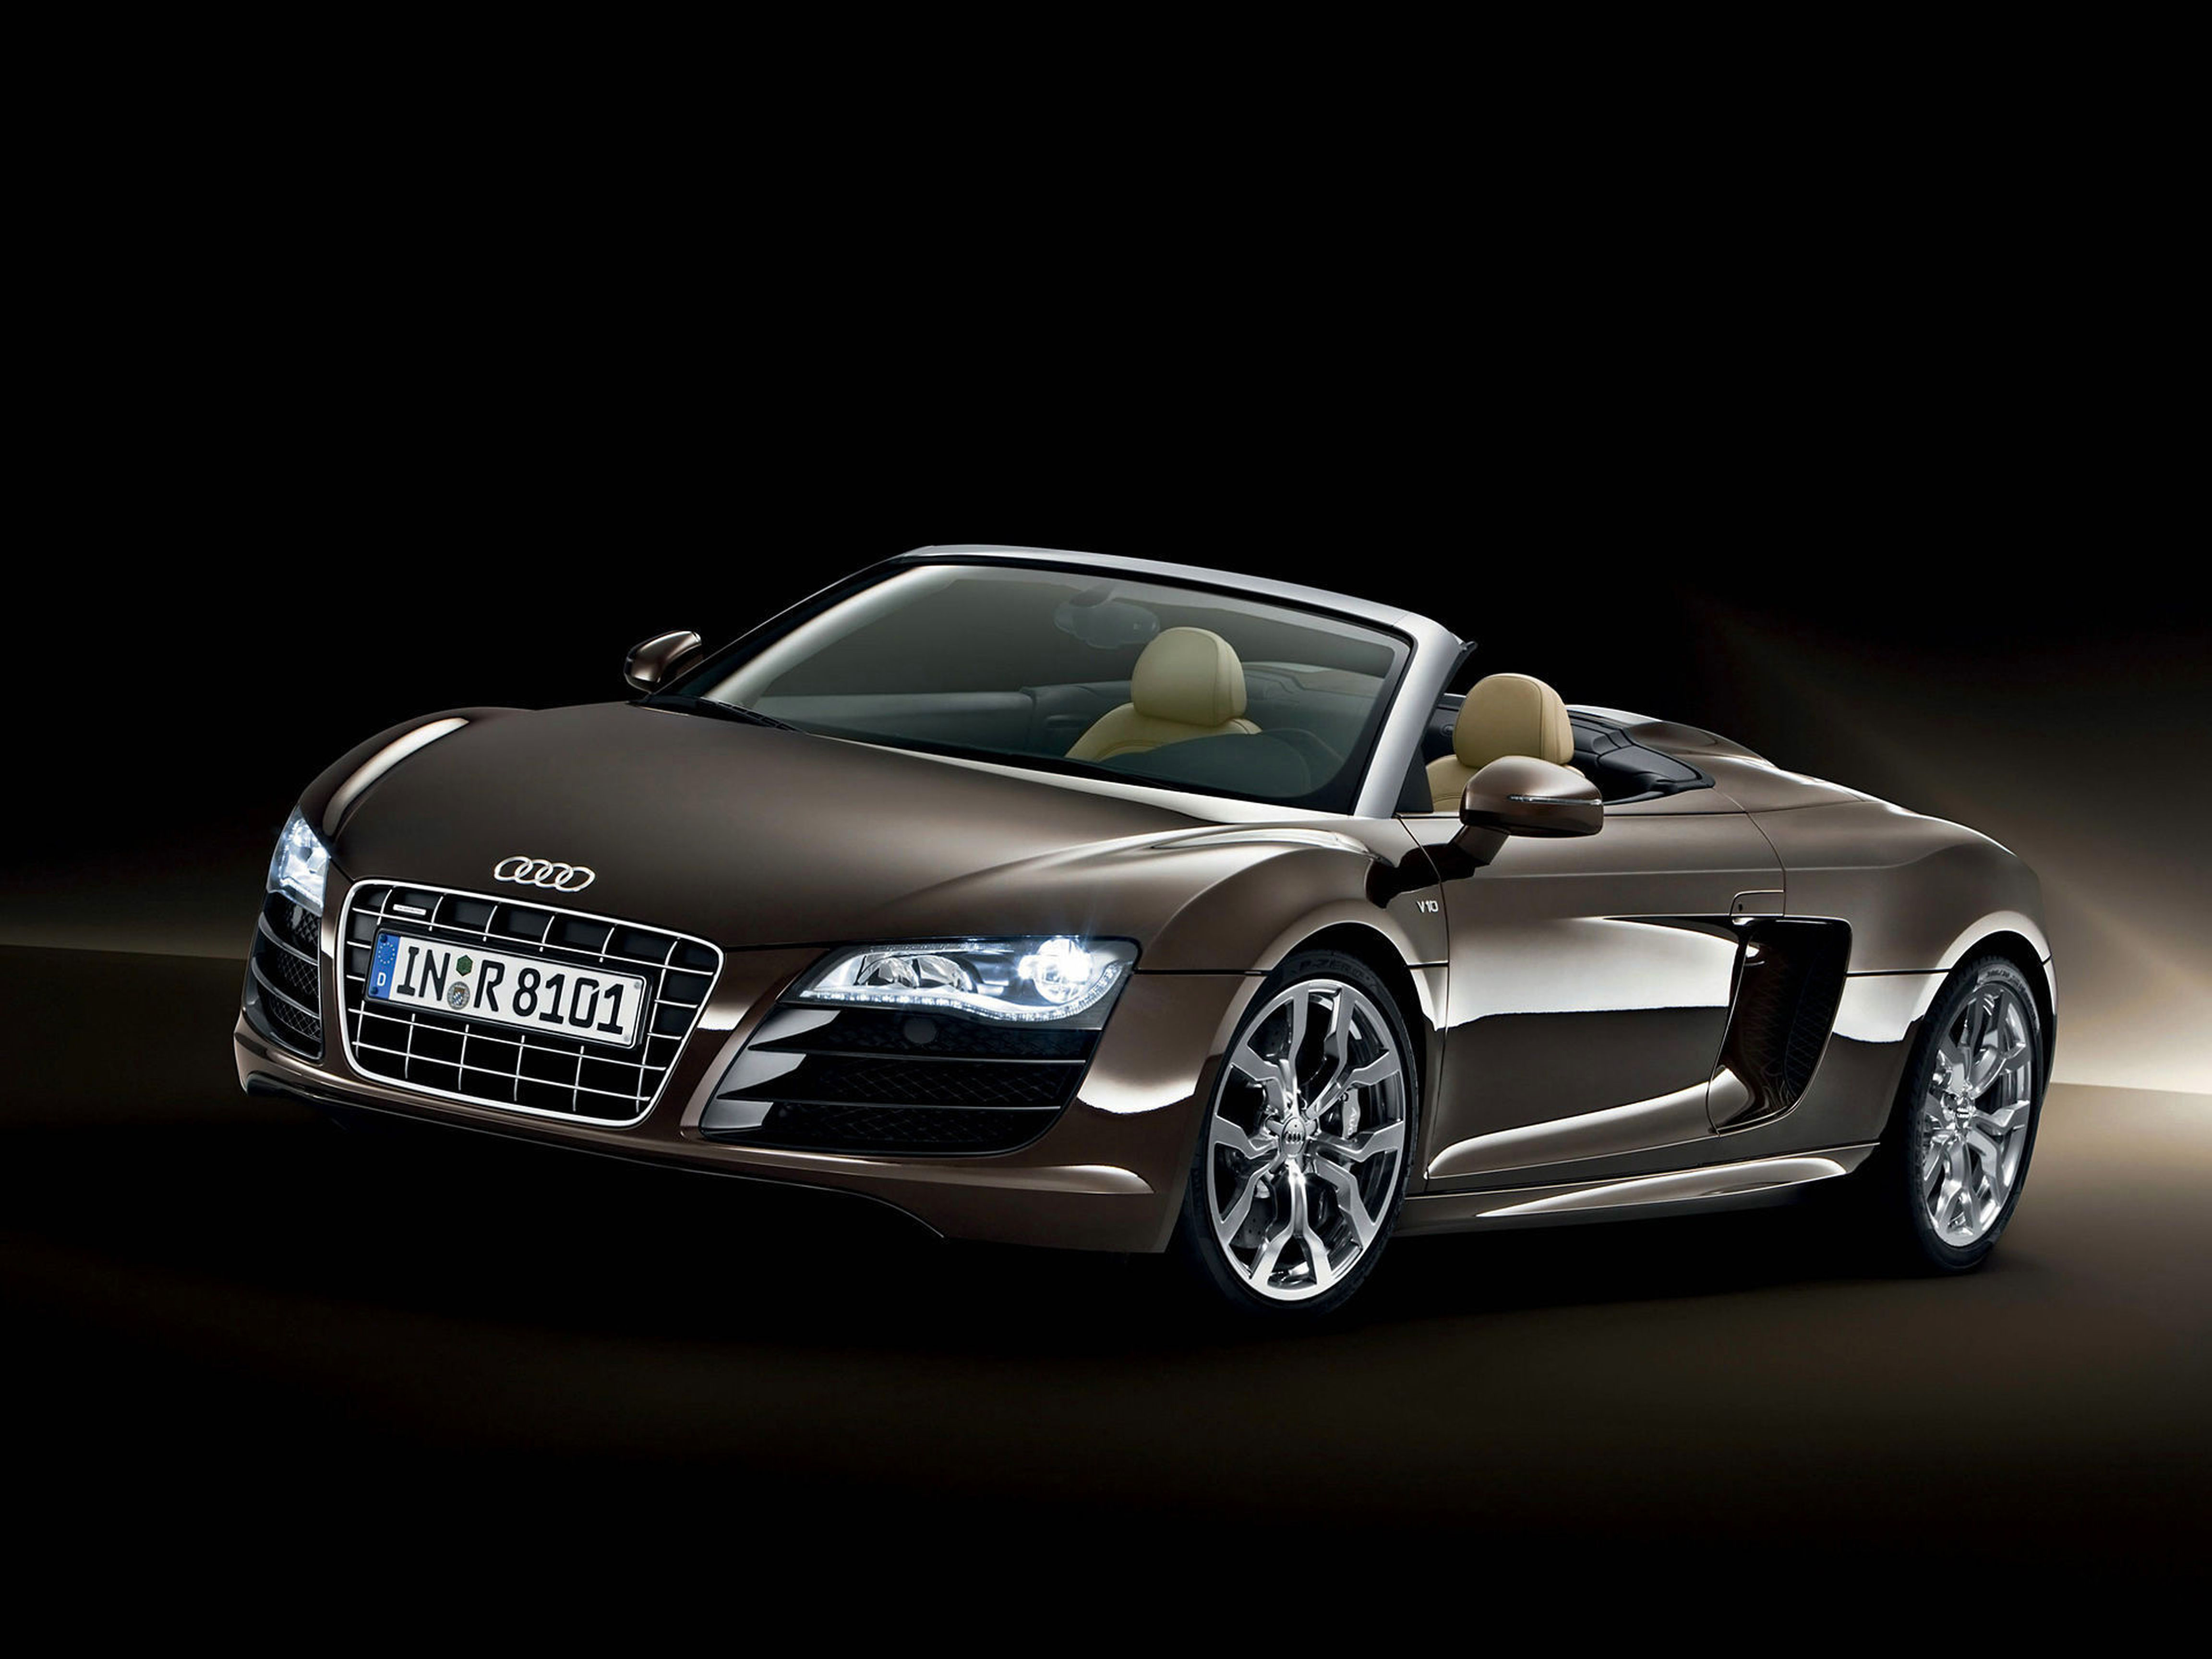 audi r8, vehicles, audi r8 spyder, audi, luxury cell phone wallpapers